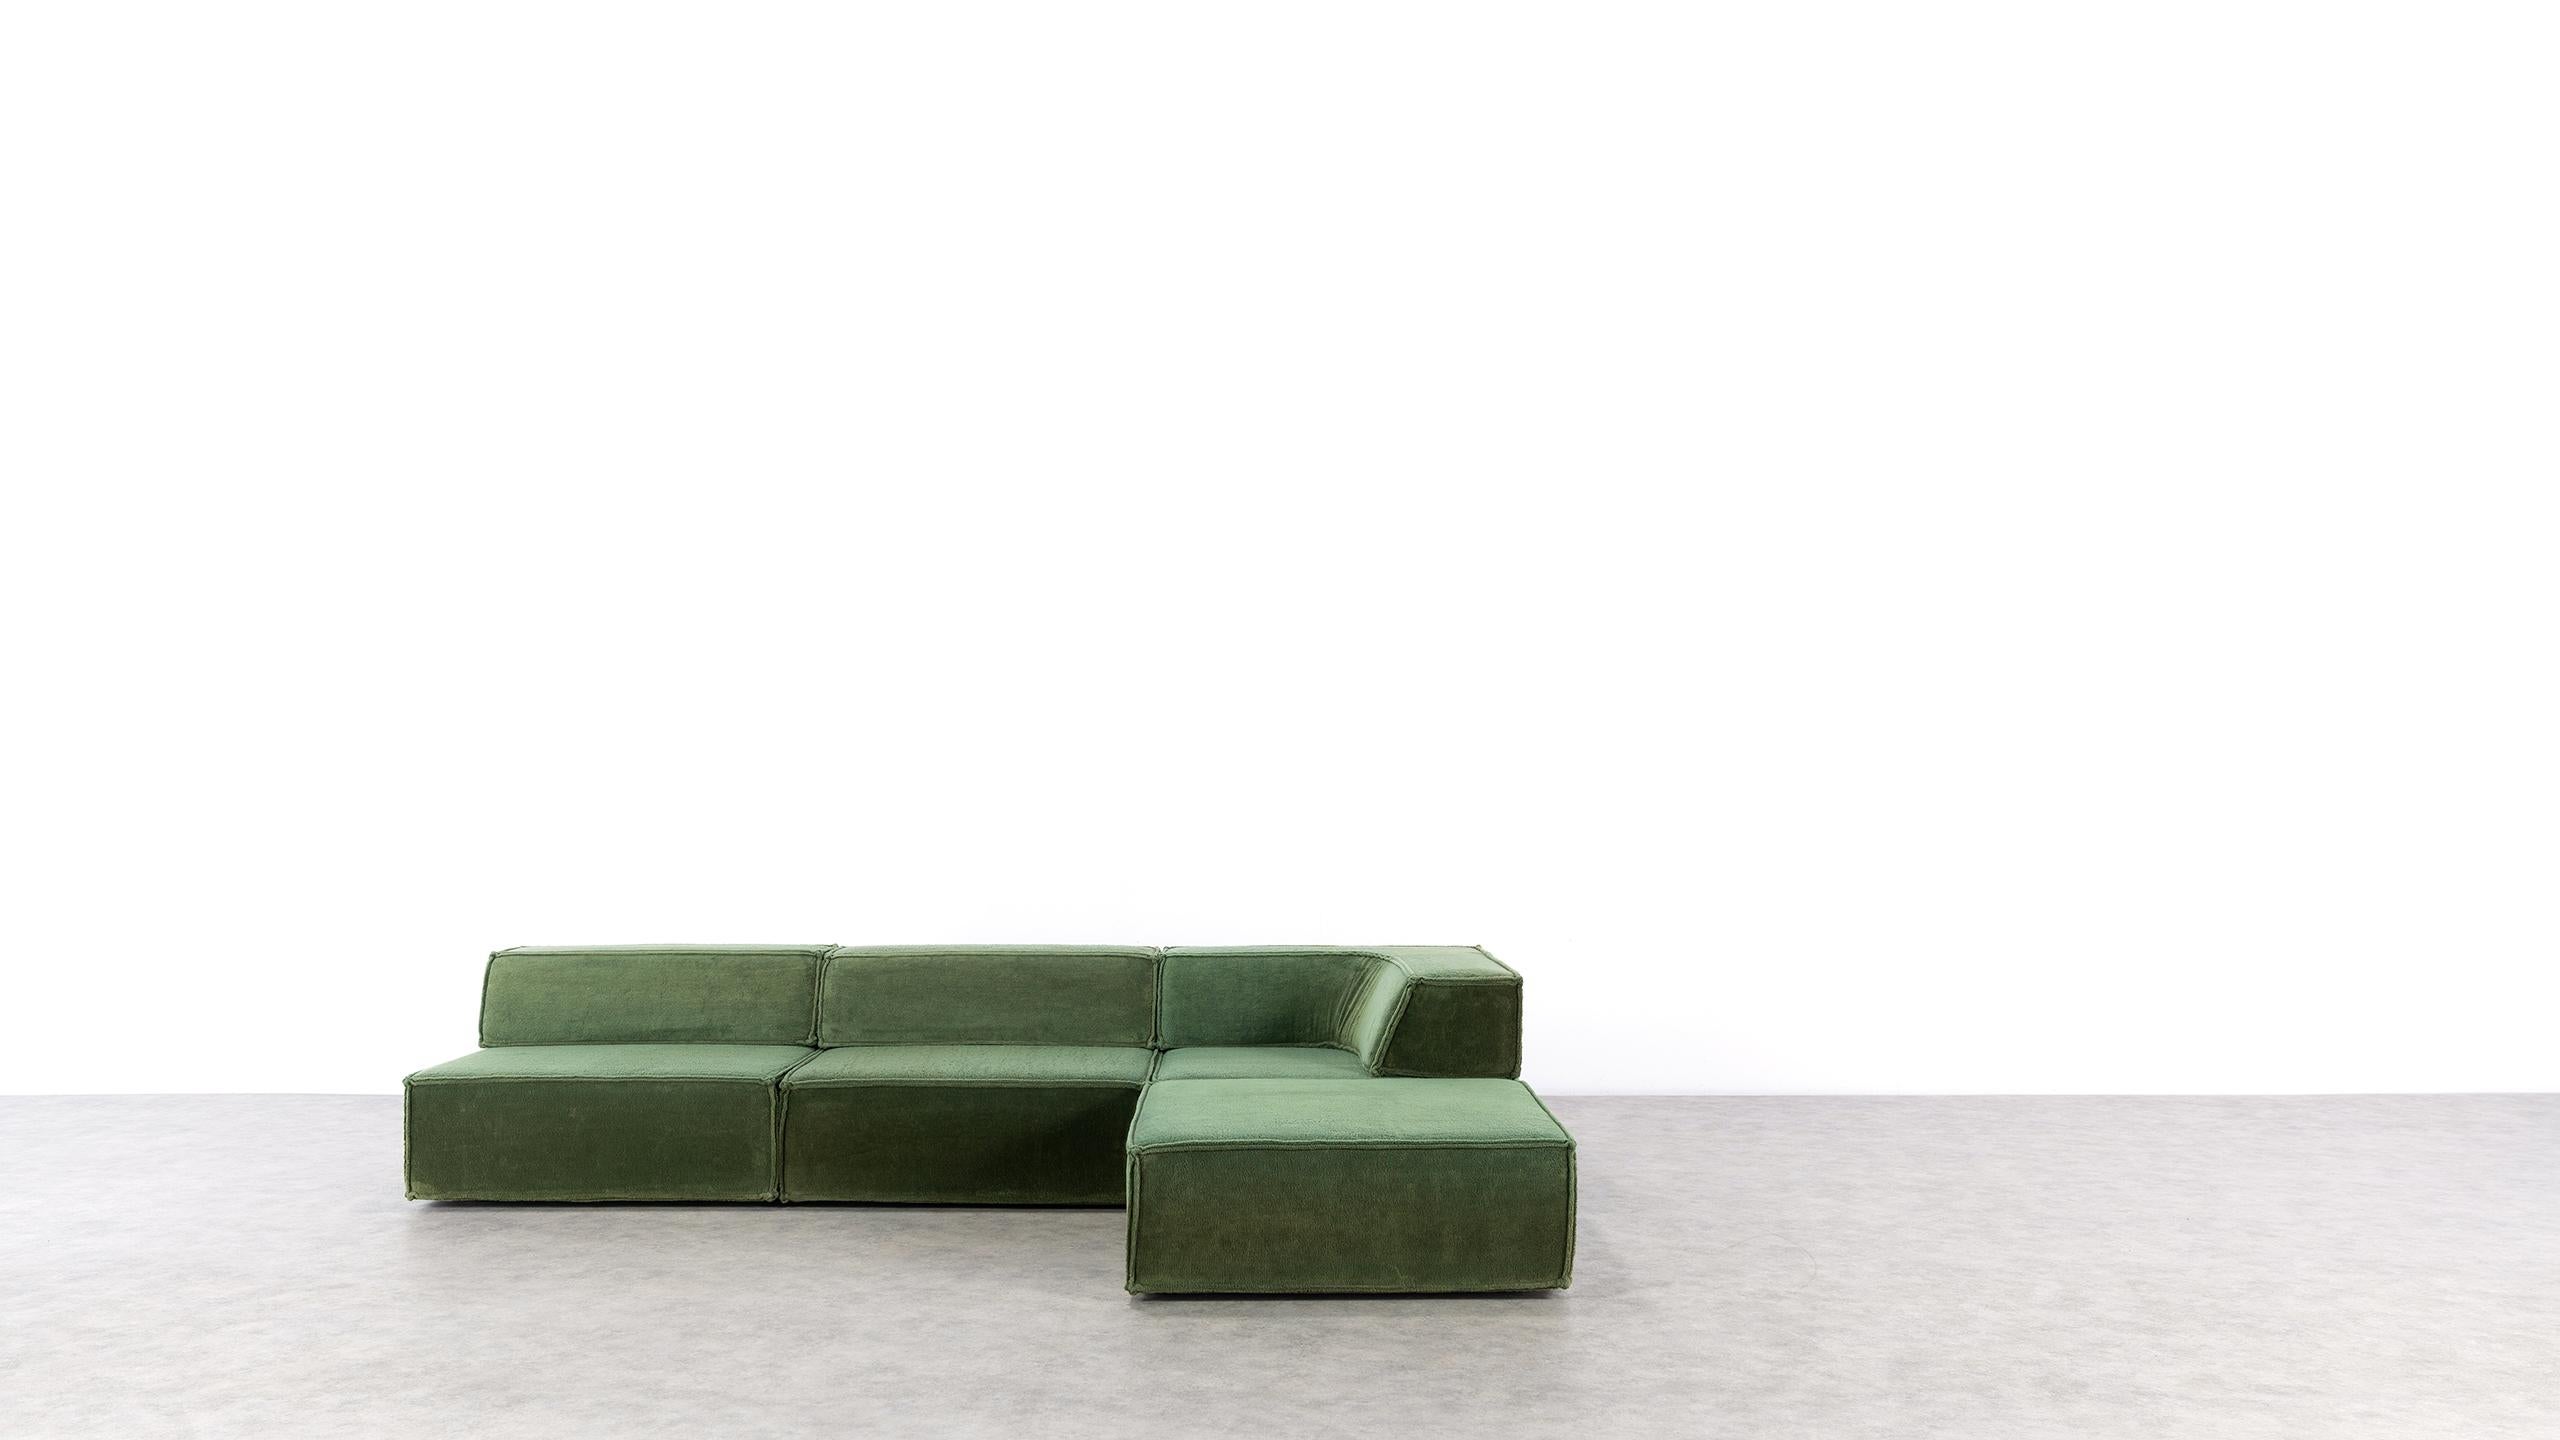 COR Trio Modular Sofa, Giant Landscape in Green, 1972 by Team Form AG, Swiss 3